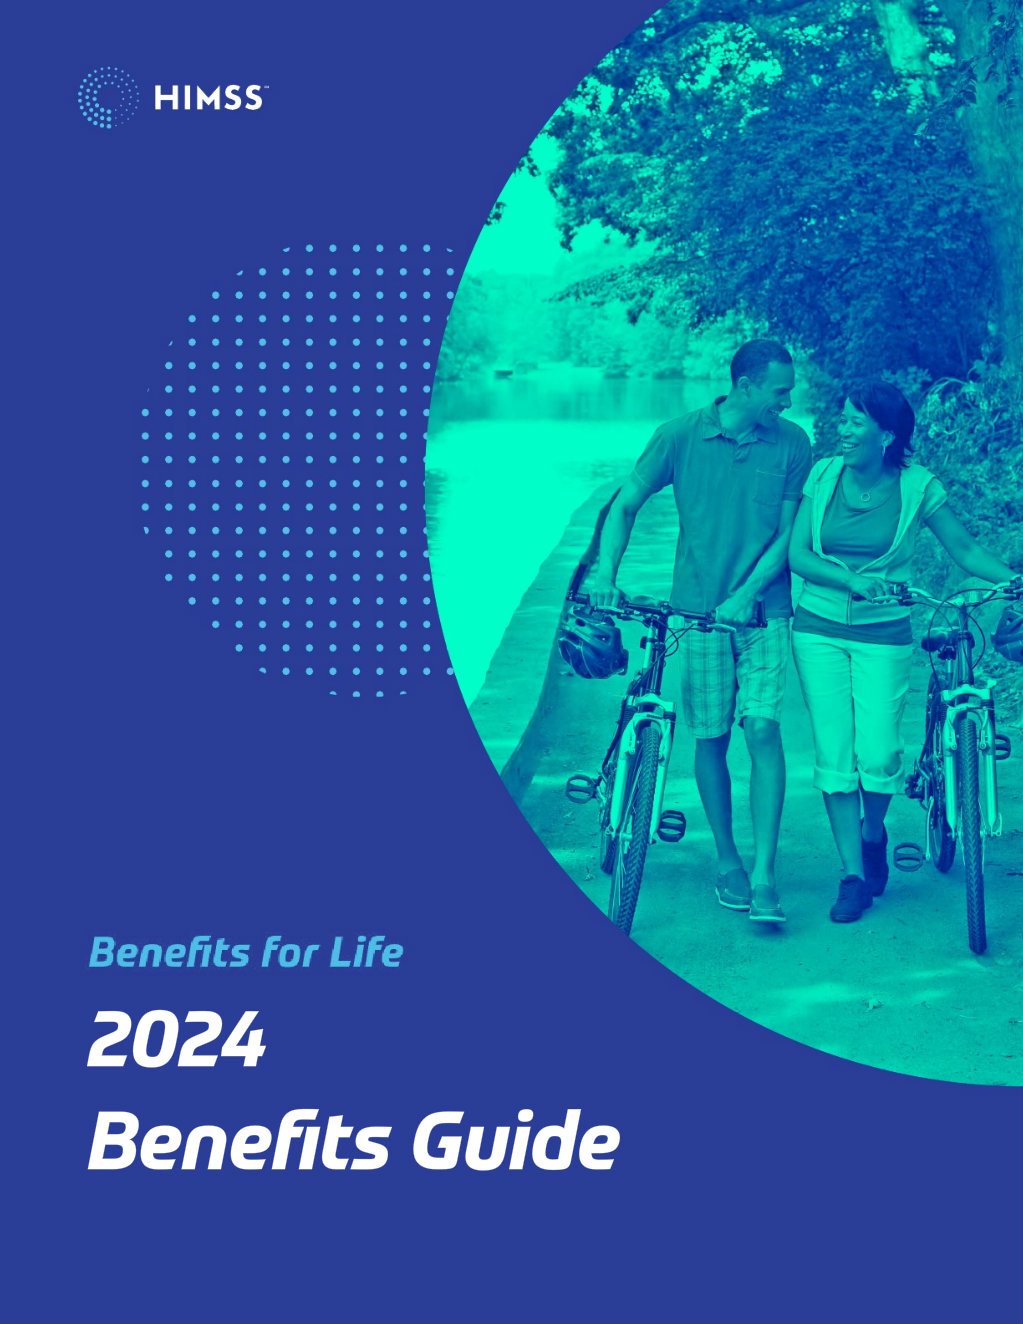 HIMSS 2024 Benefits Guide